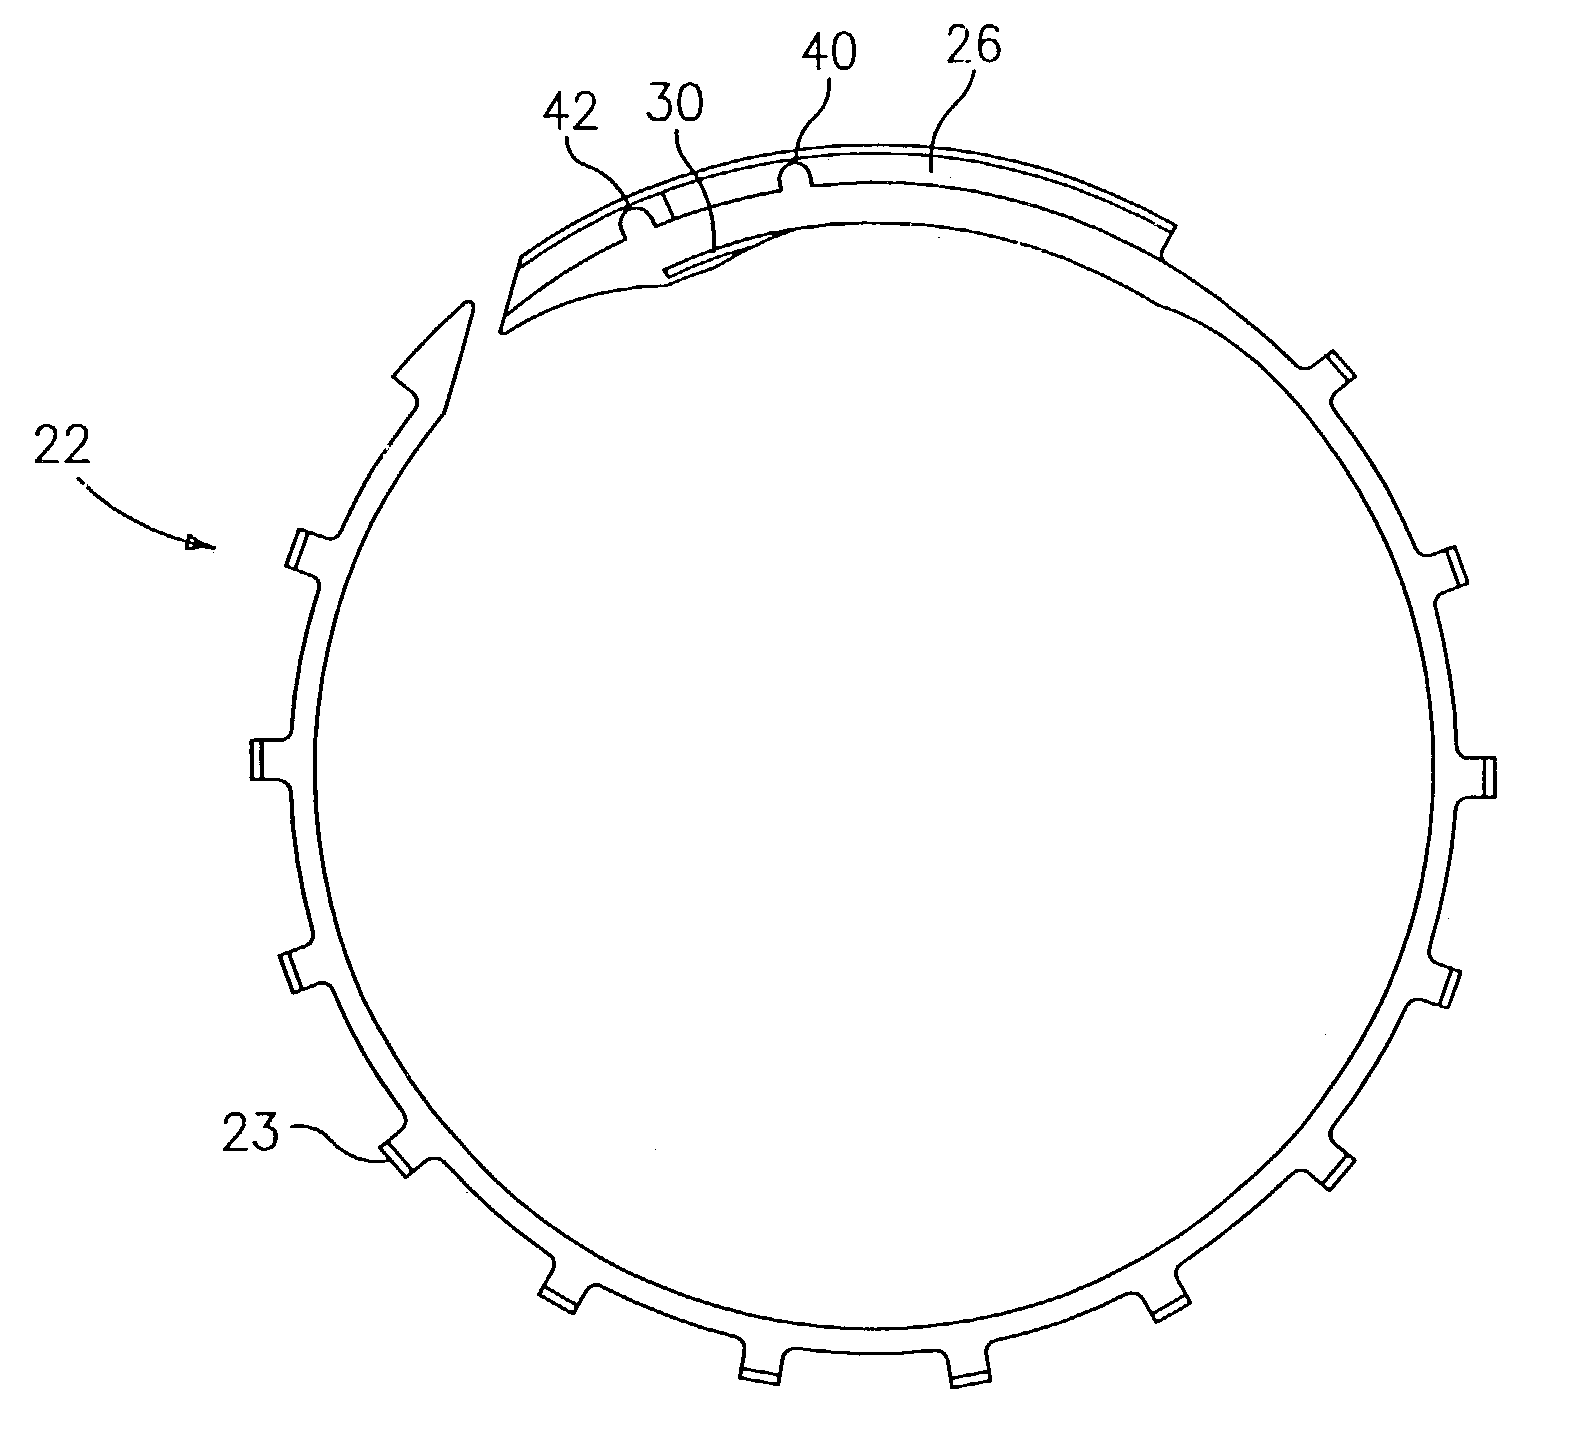 Rotor balancing system for turbomachinery